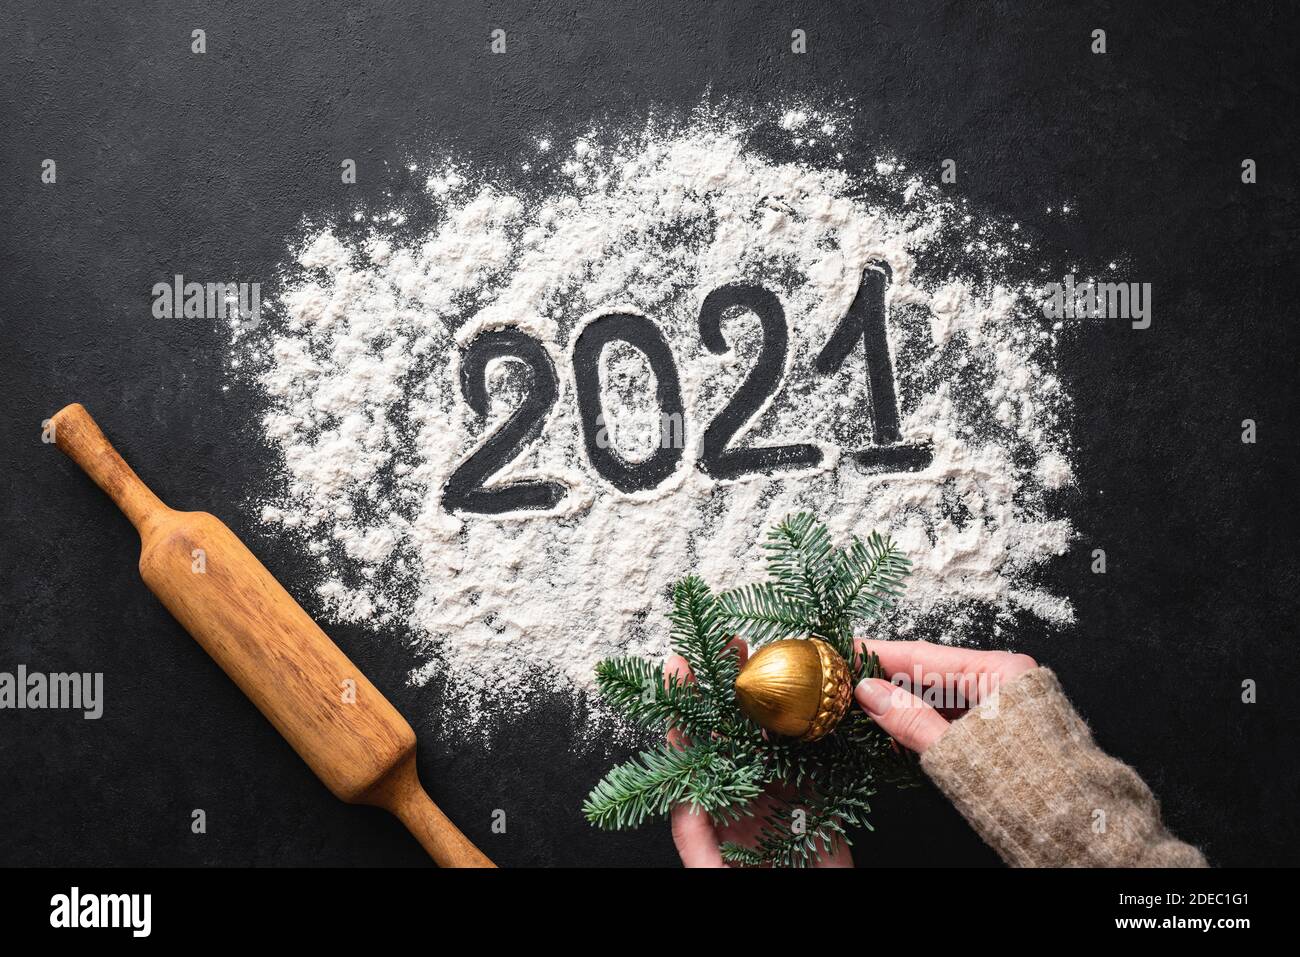 2021 written with flour on black background, top view. New Year, Christmas greeting concept Stock Photo